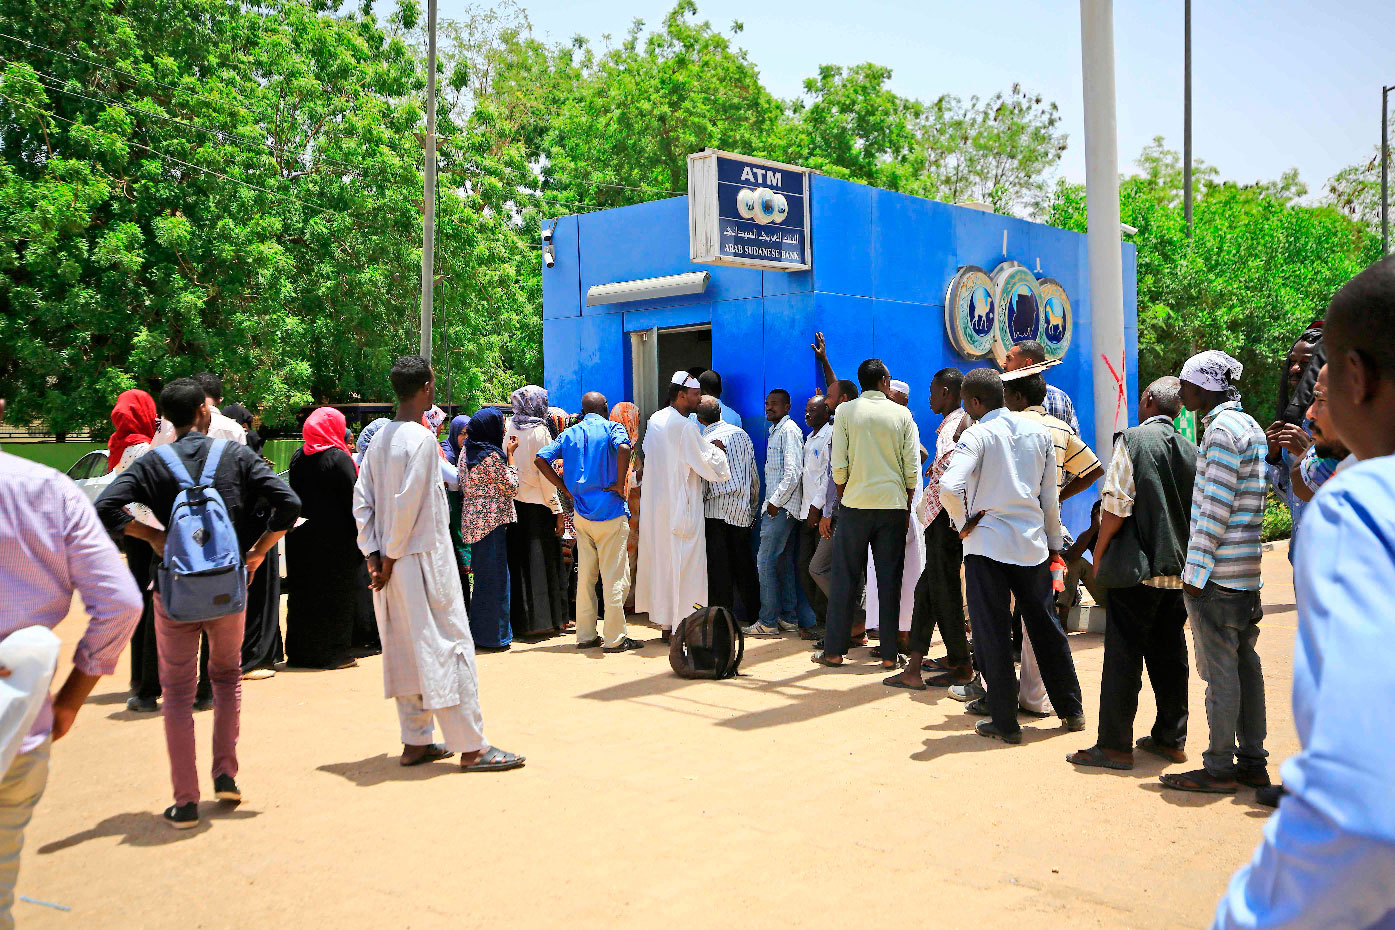 Sudanese people queue up to withdraw money from an ATM in Sudan's capital Khartoum.